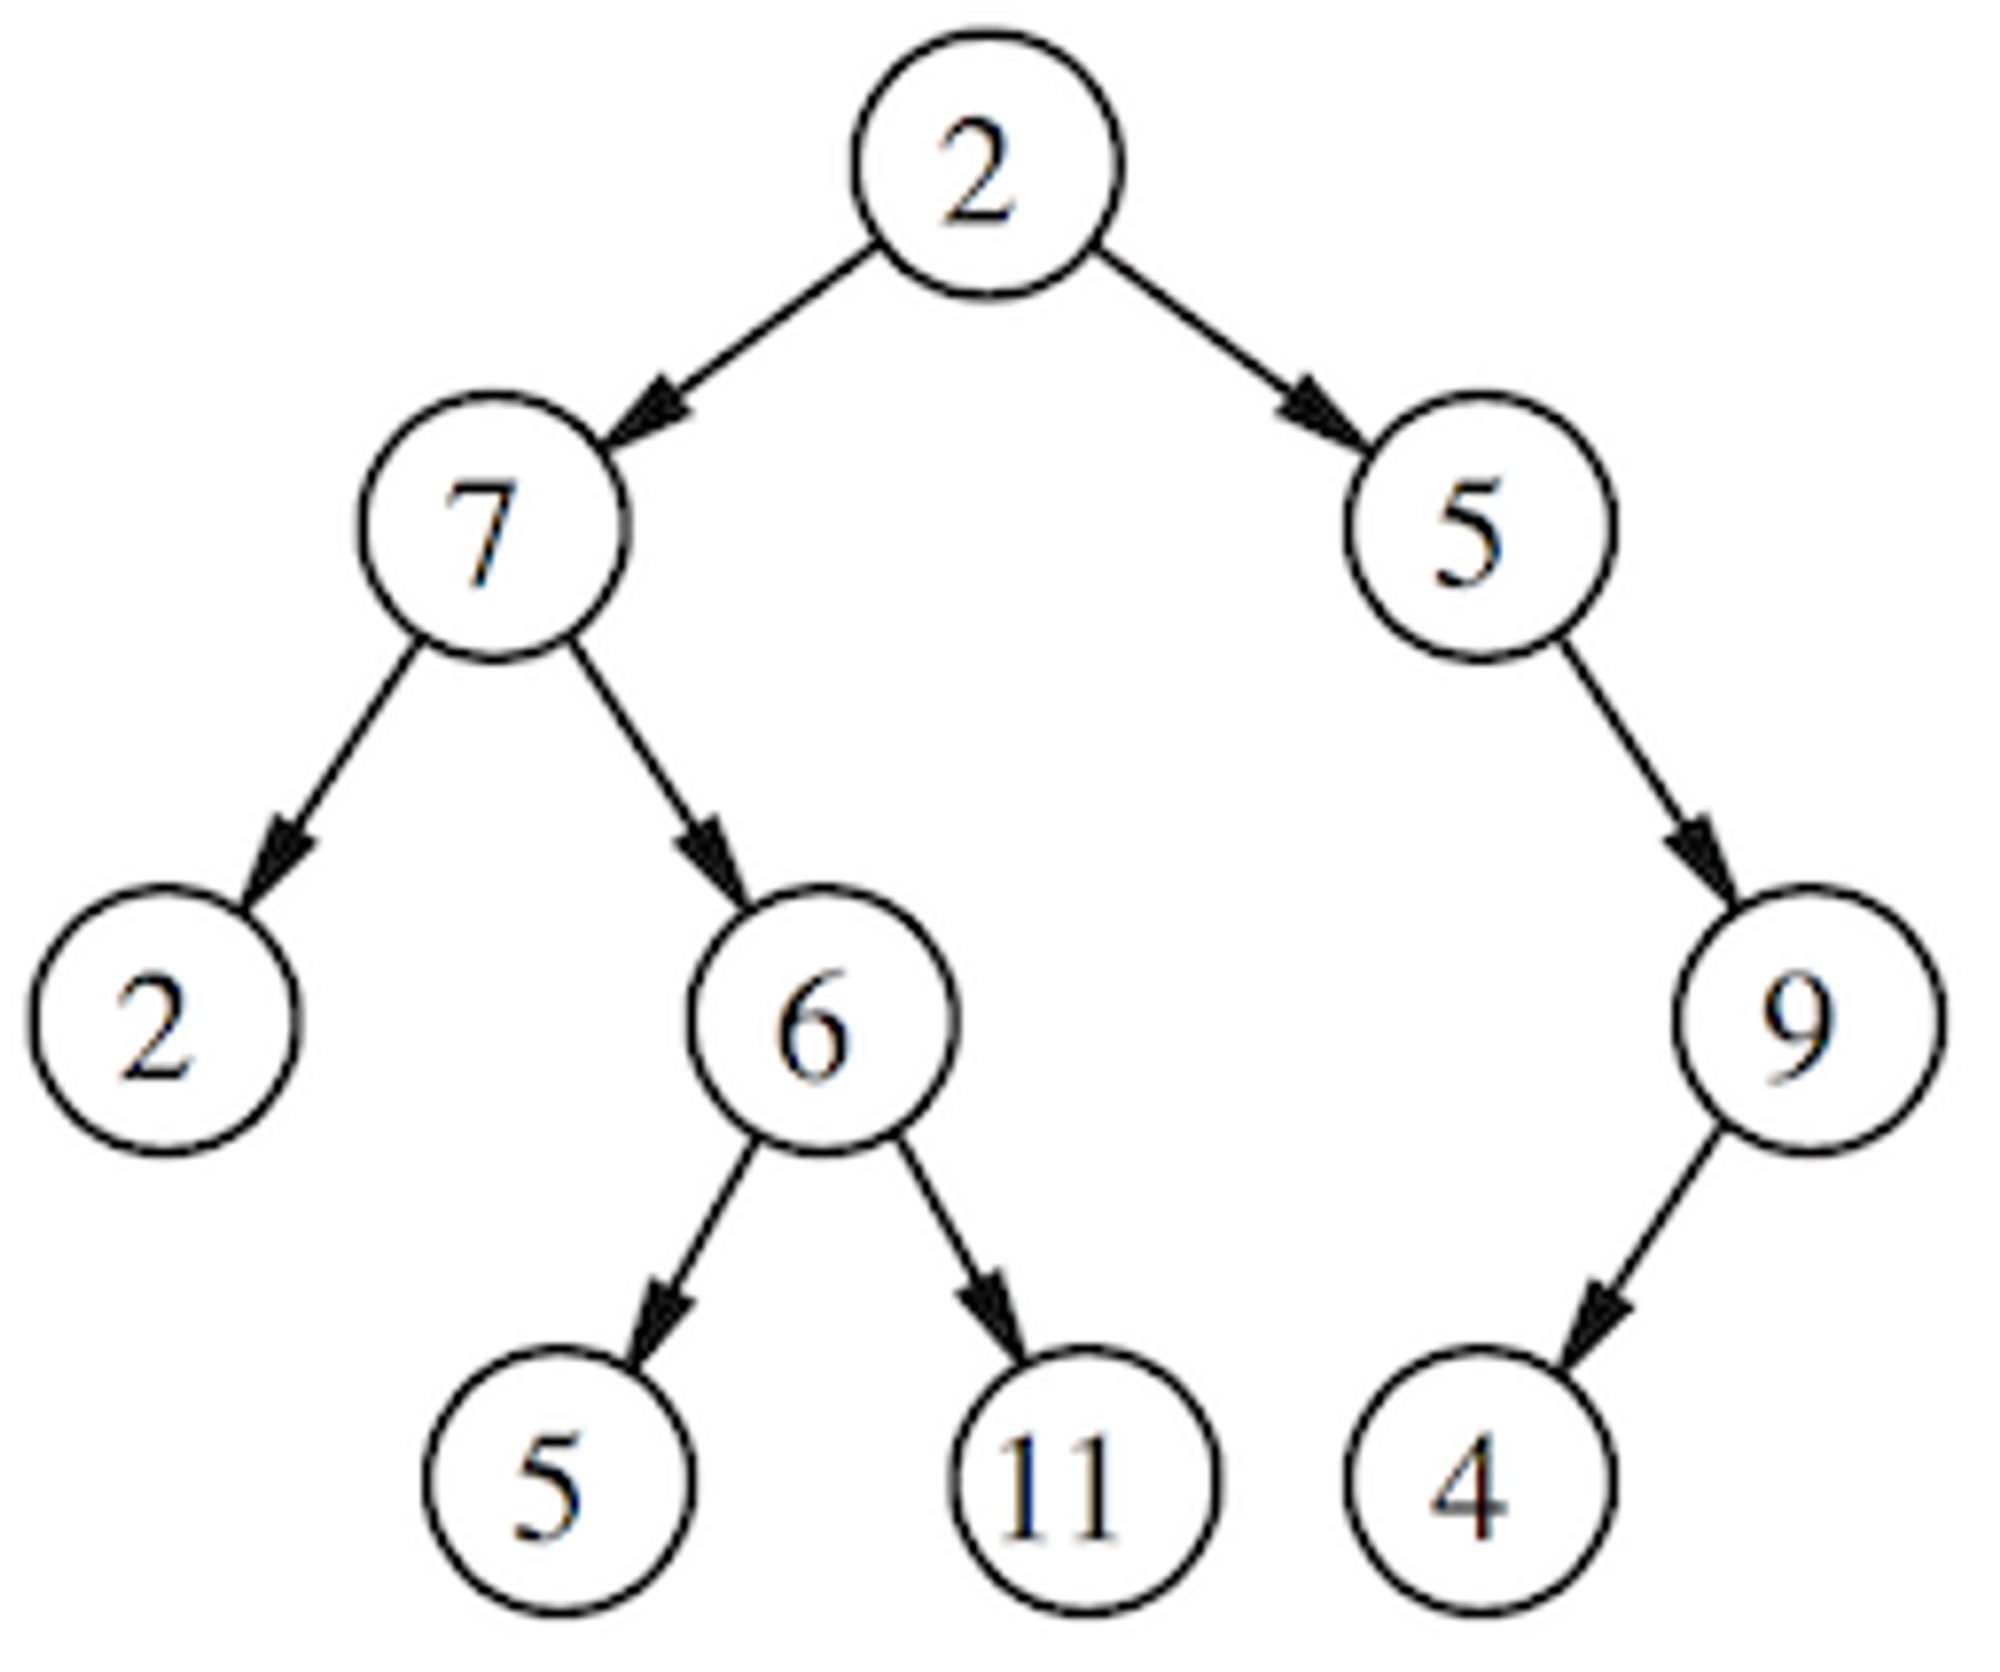 Example graph composed of nodes and edges.